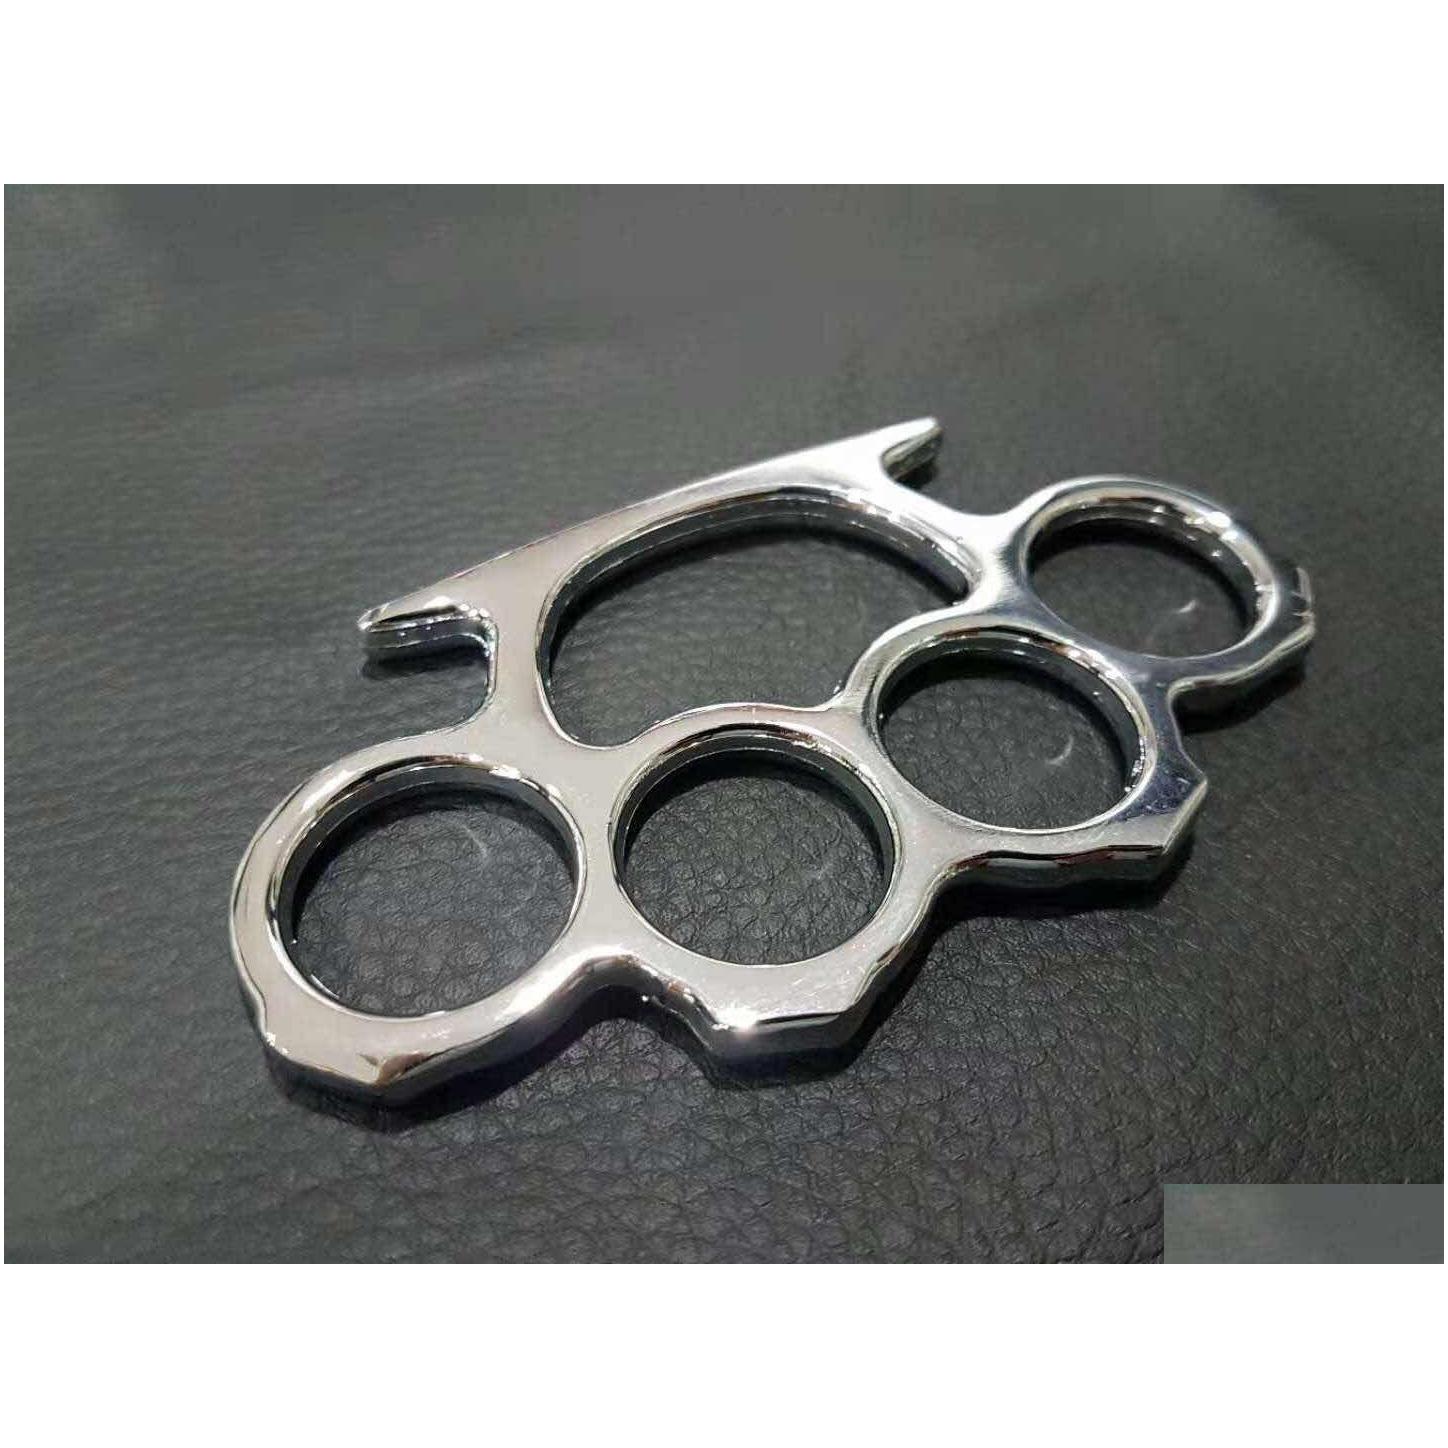 weight about 86g silverblackgold color thin steel brass knuckle dustersself